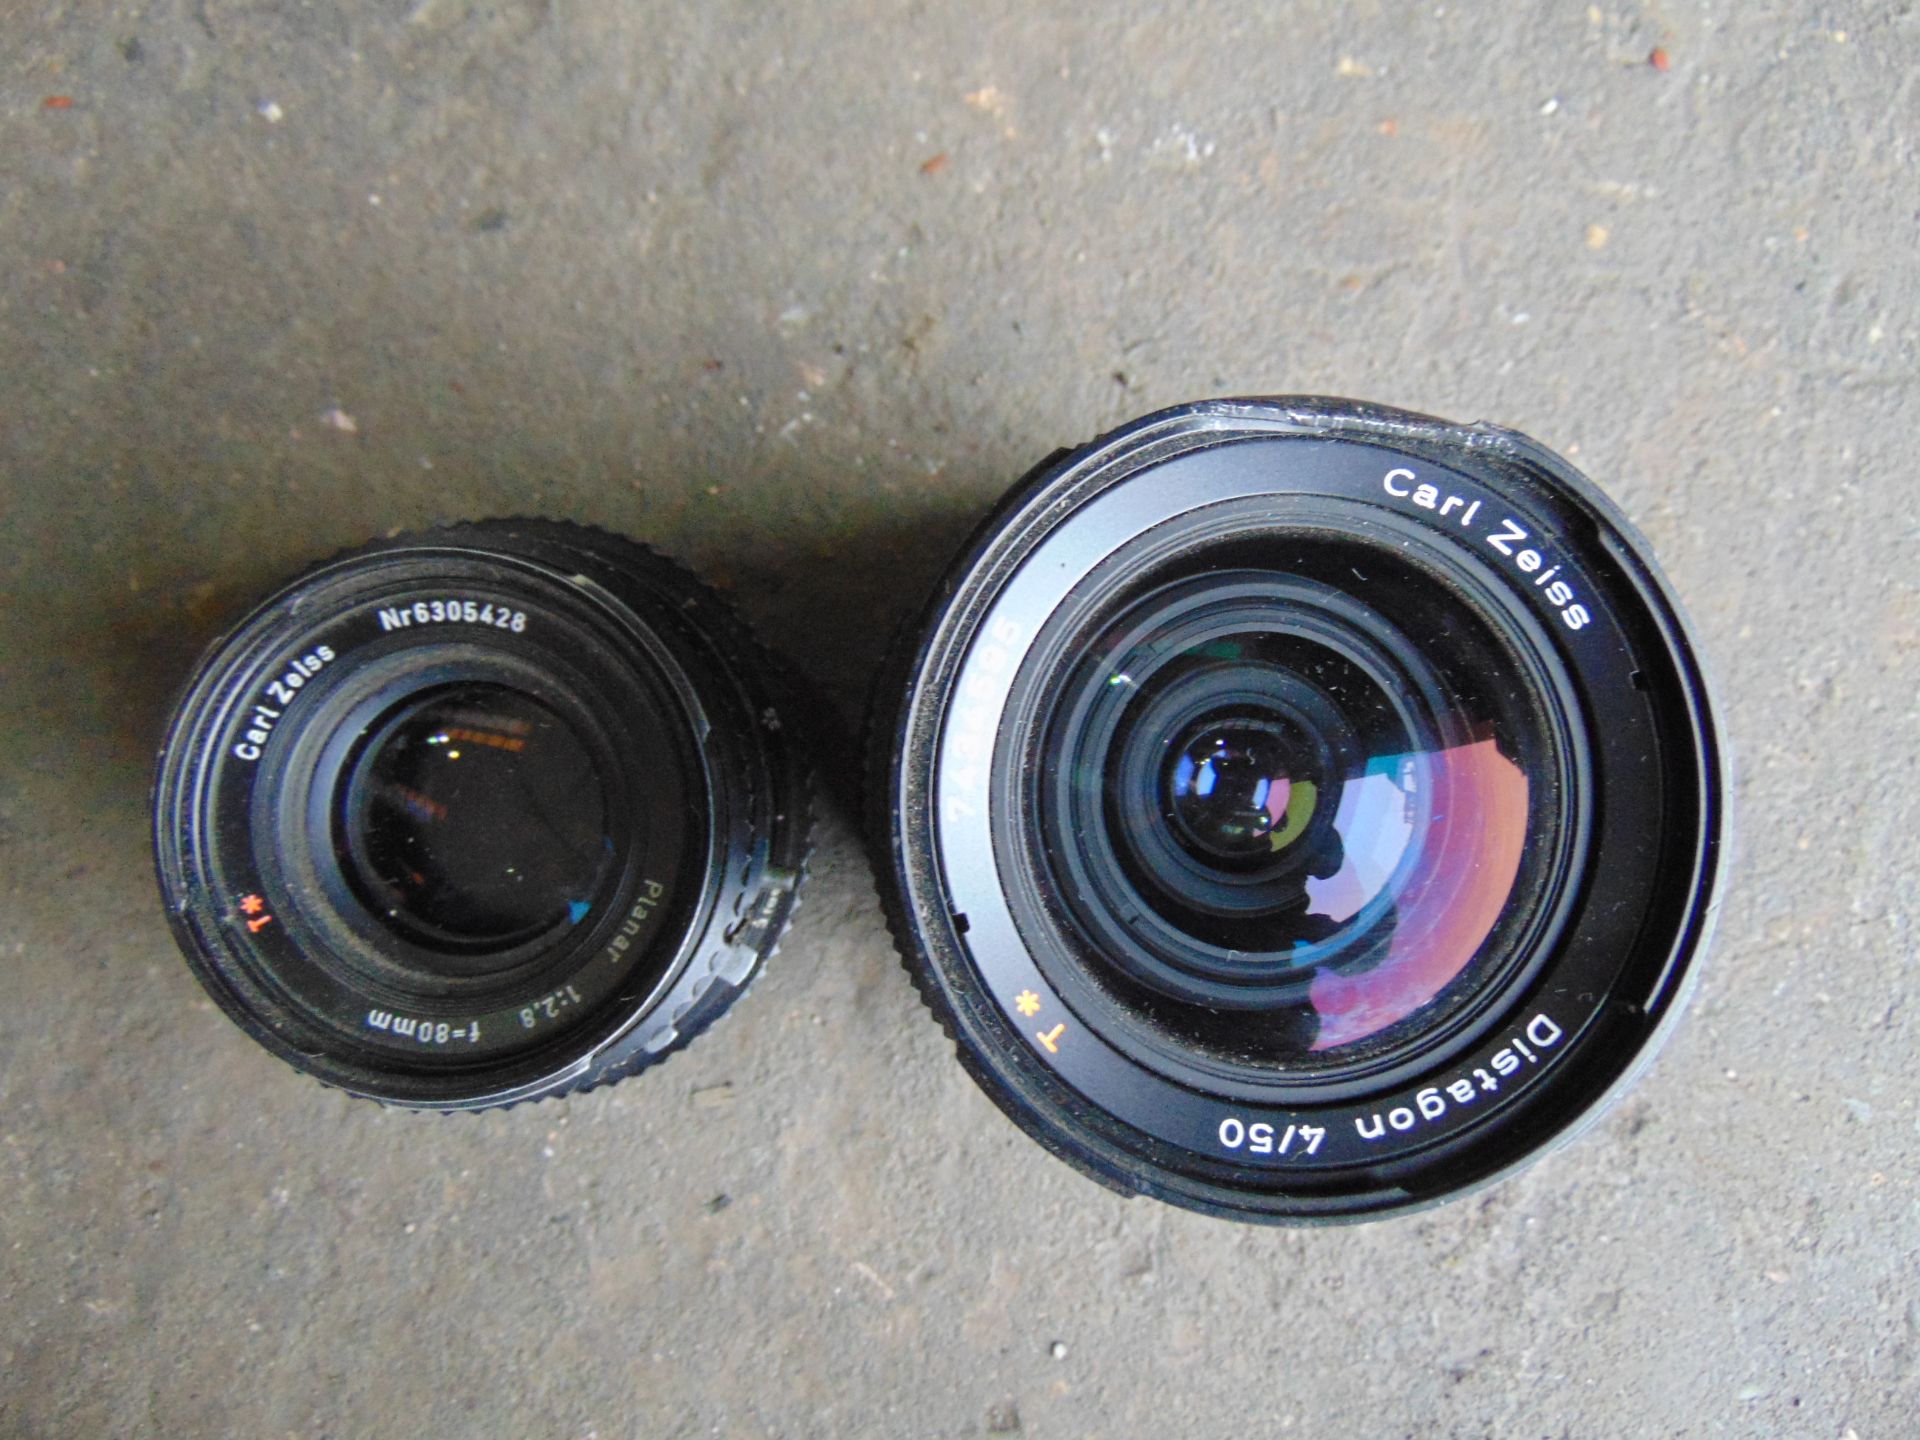 2 x Carl Zeiss Camera Lenses - Image 2 of 6